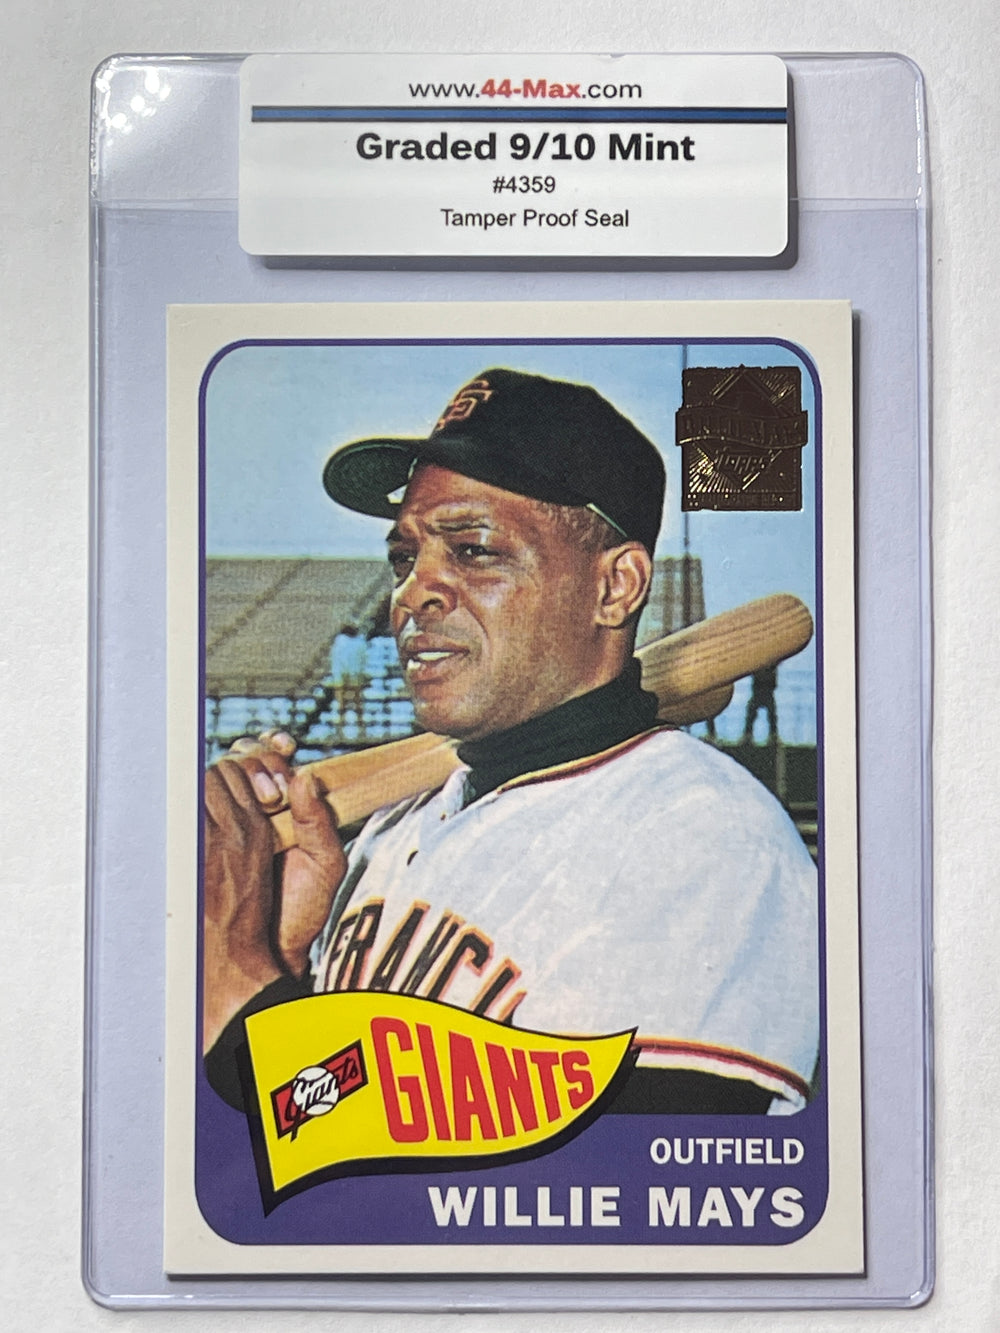 Willie Mays 1996 Topps Baseball Card. 44-Max 9/10 Mint #4359